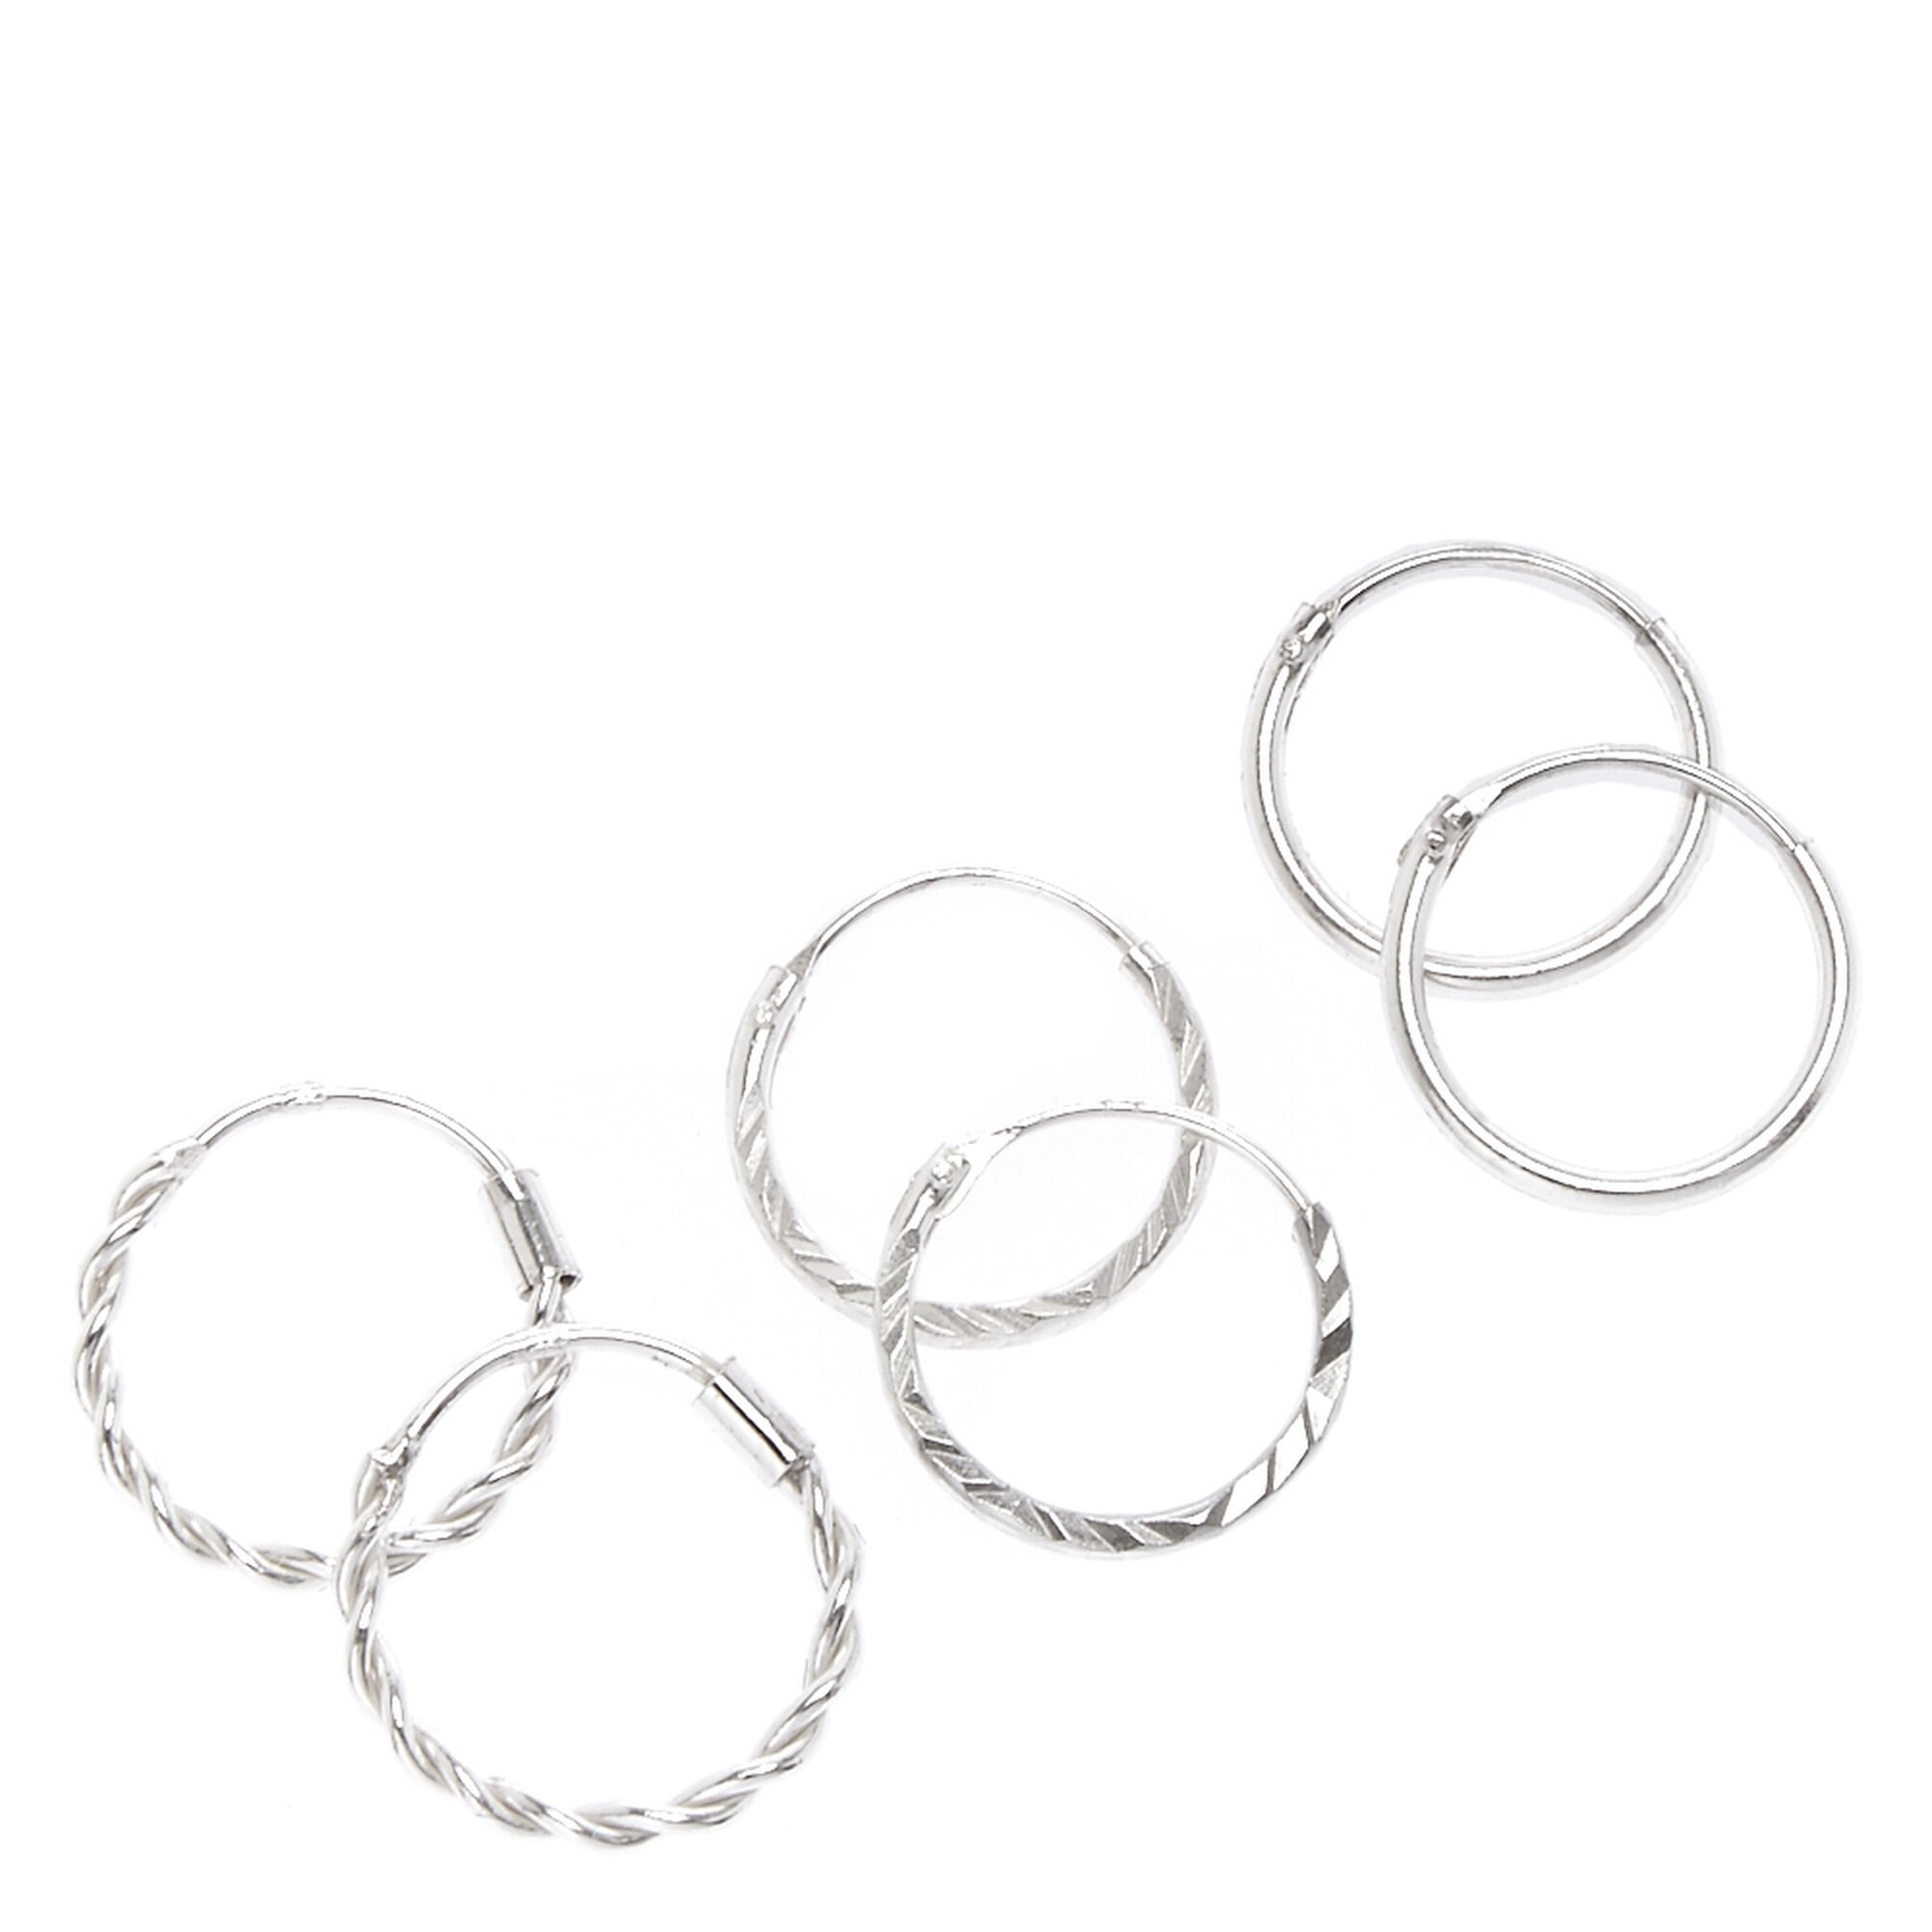 View Claires 12MM Textured Hoop Earrings 3 Pack Silver information